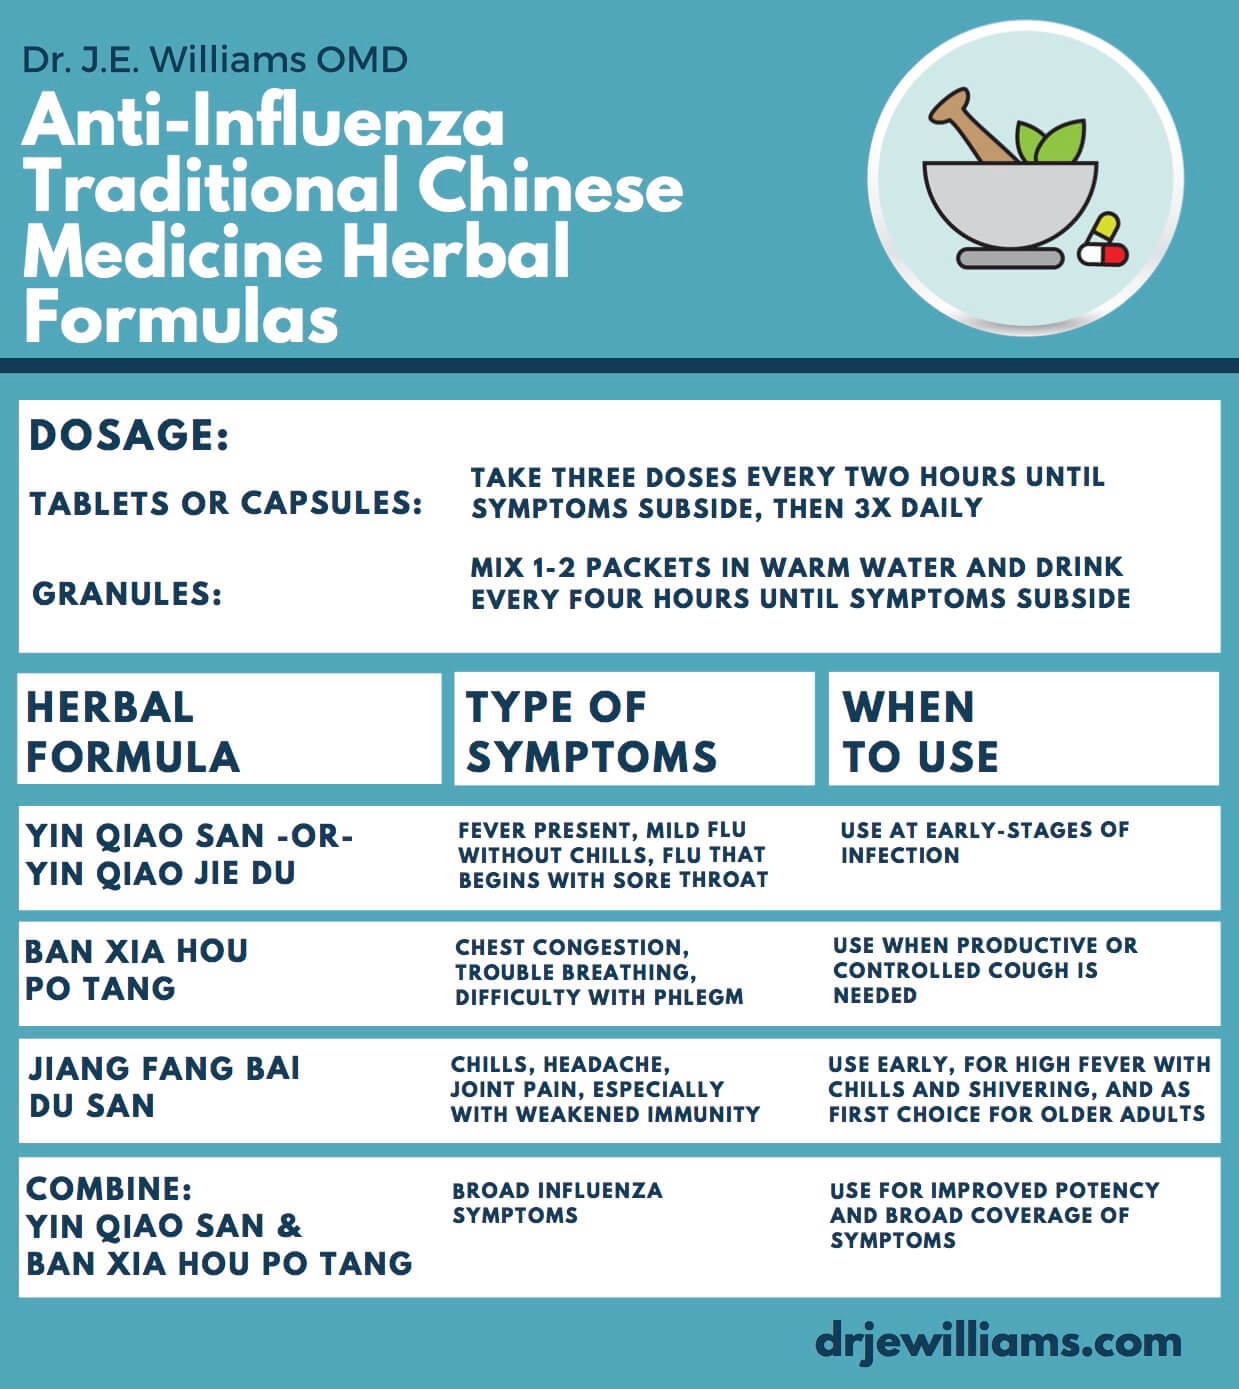 Traditional Chinese Medicine Herbal Formulas for Influenza